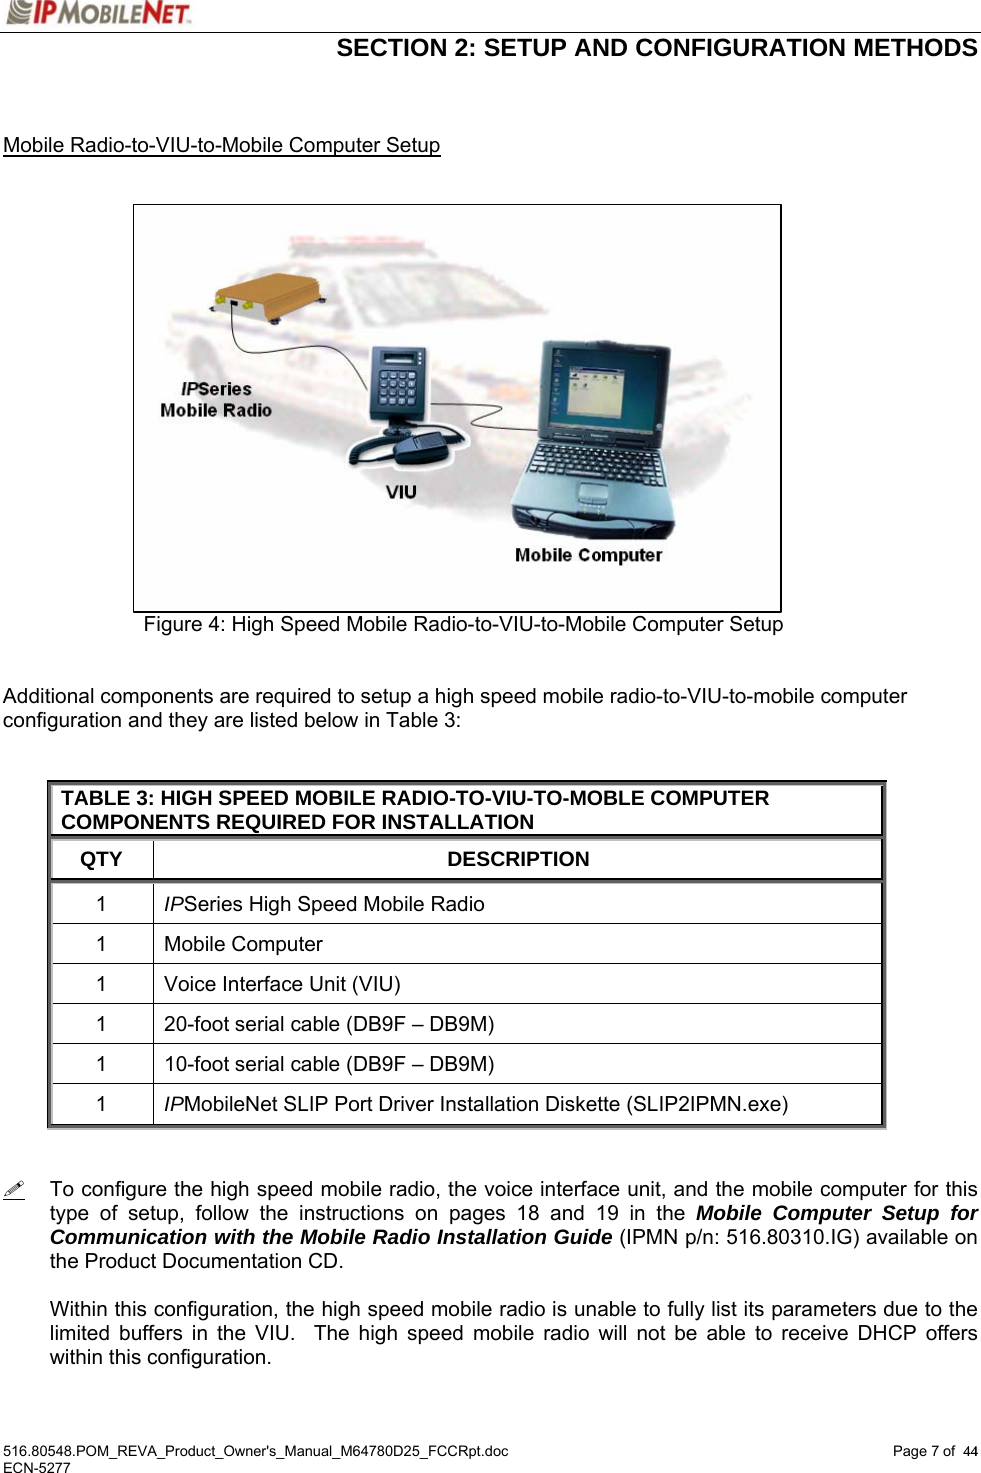  SECTION 2: SETUP AND CONFIGURATION METHODS  516.80548.POM_REVA_Product_Owner&apos;s_Manual_M64780D25_FCCRpt.doc Page 7 of  44 ECN-5277  44  Mobile Radio-to-VIU-to-Mobile Computer Setup                    Figure 4: High Speed Mobile Radio-to-VIU-to-Mobile Computer Setup   Additional components are required to setup a high speed mobile radio-to-VIU-to-mobile computer configuration and they are listed below in Table 3:   TABLE 3: HIGH SPEED MOBILE RADIO-TO-VIU-TO-MOBLE COMPUTER COMPONENTS REQUIRED FOR INSTALLATION QTY DESCRIPTION 1  IPSeries High Speed Mobile Radio 1 Mobile Computer 1  Voice Interface Unit (VIU) 1  20-foot serial cable (DB9F – DB9M) 1  10-foot serial cable (DB9F – DB9M) 1  IPMobileNet SLIP Port Driver Installation Diskette (SLIP2IPMN.exe)     To configure the high speed mobile radio, the voice interface unit, and the mobile computer for this type of setup, follow the instructions on pages 18 and 19 in the Mobile Computer Setup for Communication with the Mobile Radio Installation Guide (IPMN p/n: 516.80310.IG) available on the Product Documentation CD.  Within this configuration, the high speed mobile radio is unable to fully list its parameters due to the limited buffers in the VIU.  The high speed mobile radio will not be able to receive DHCP offers within this configuration.   